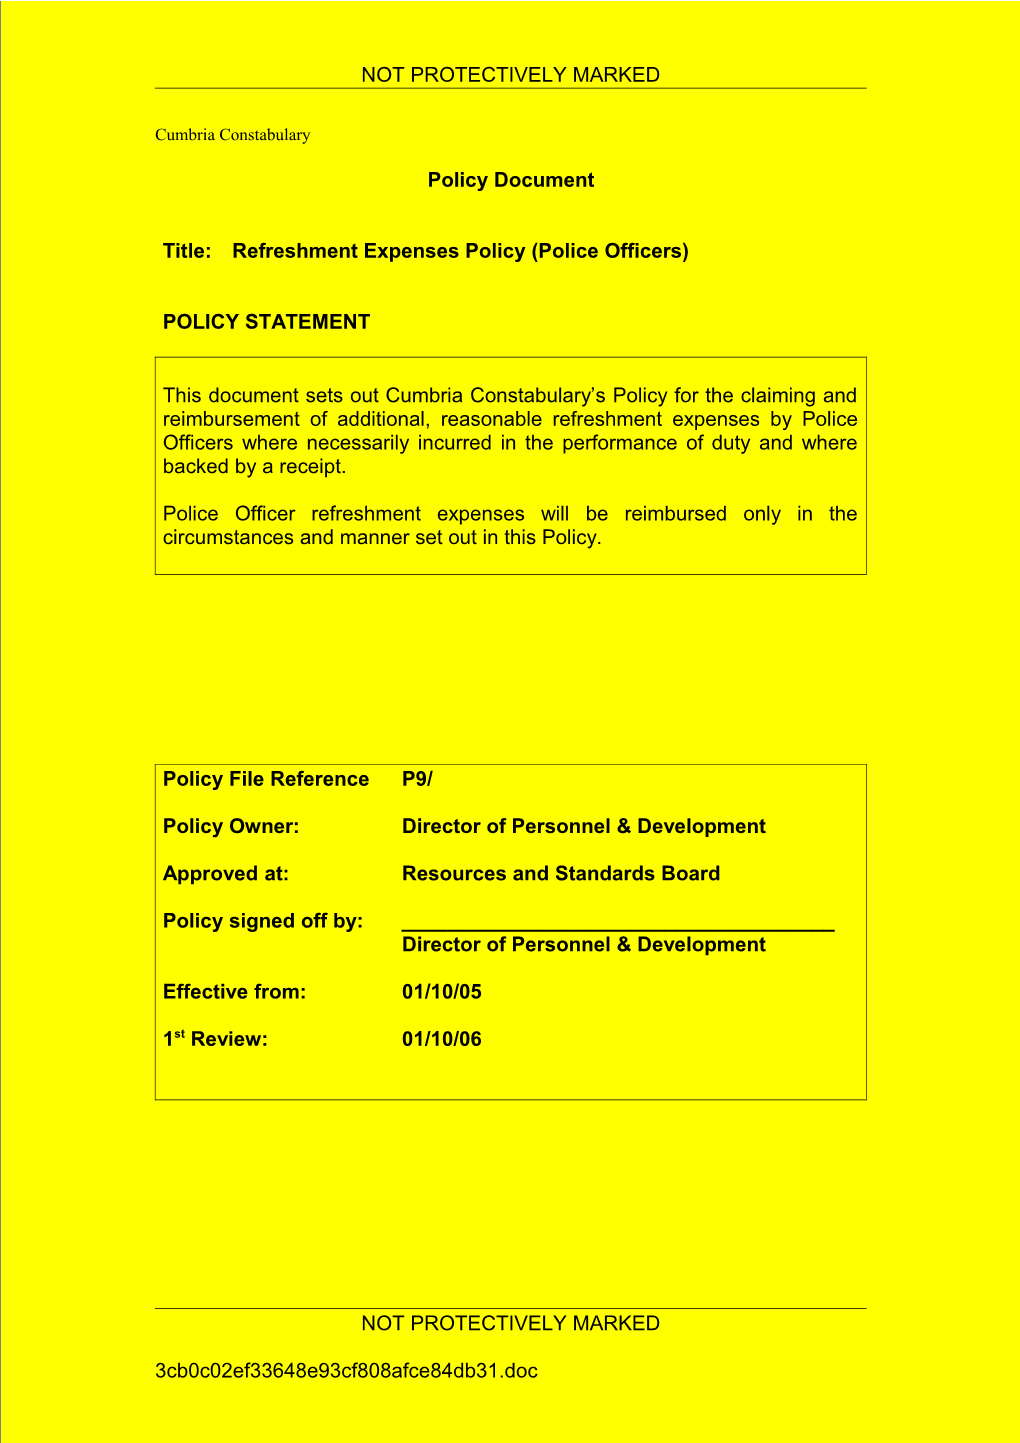 Refreshment Expenses Policy for Police Officers